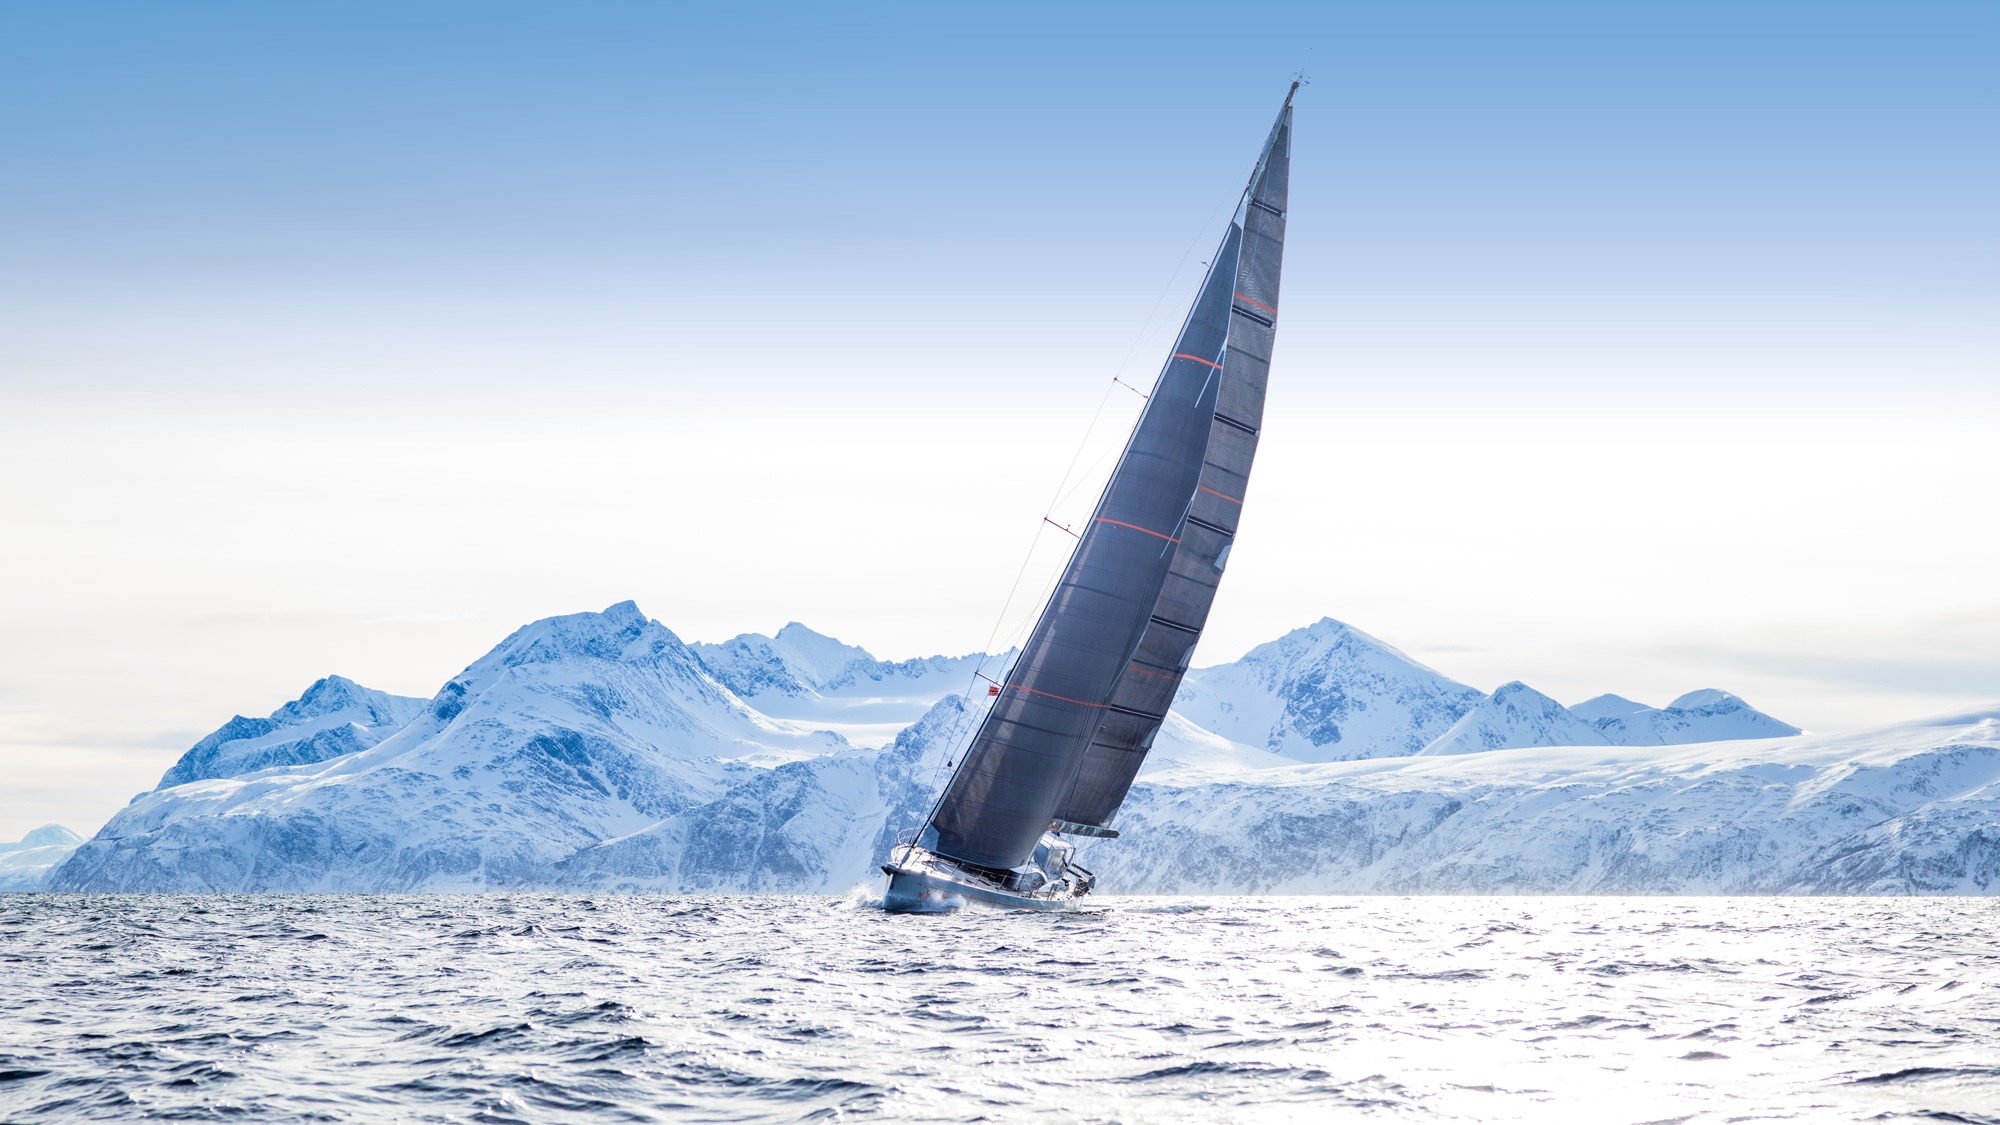 Sailing to Greenland: an unforgettable catamaran journey through iceberg-studded fjords